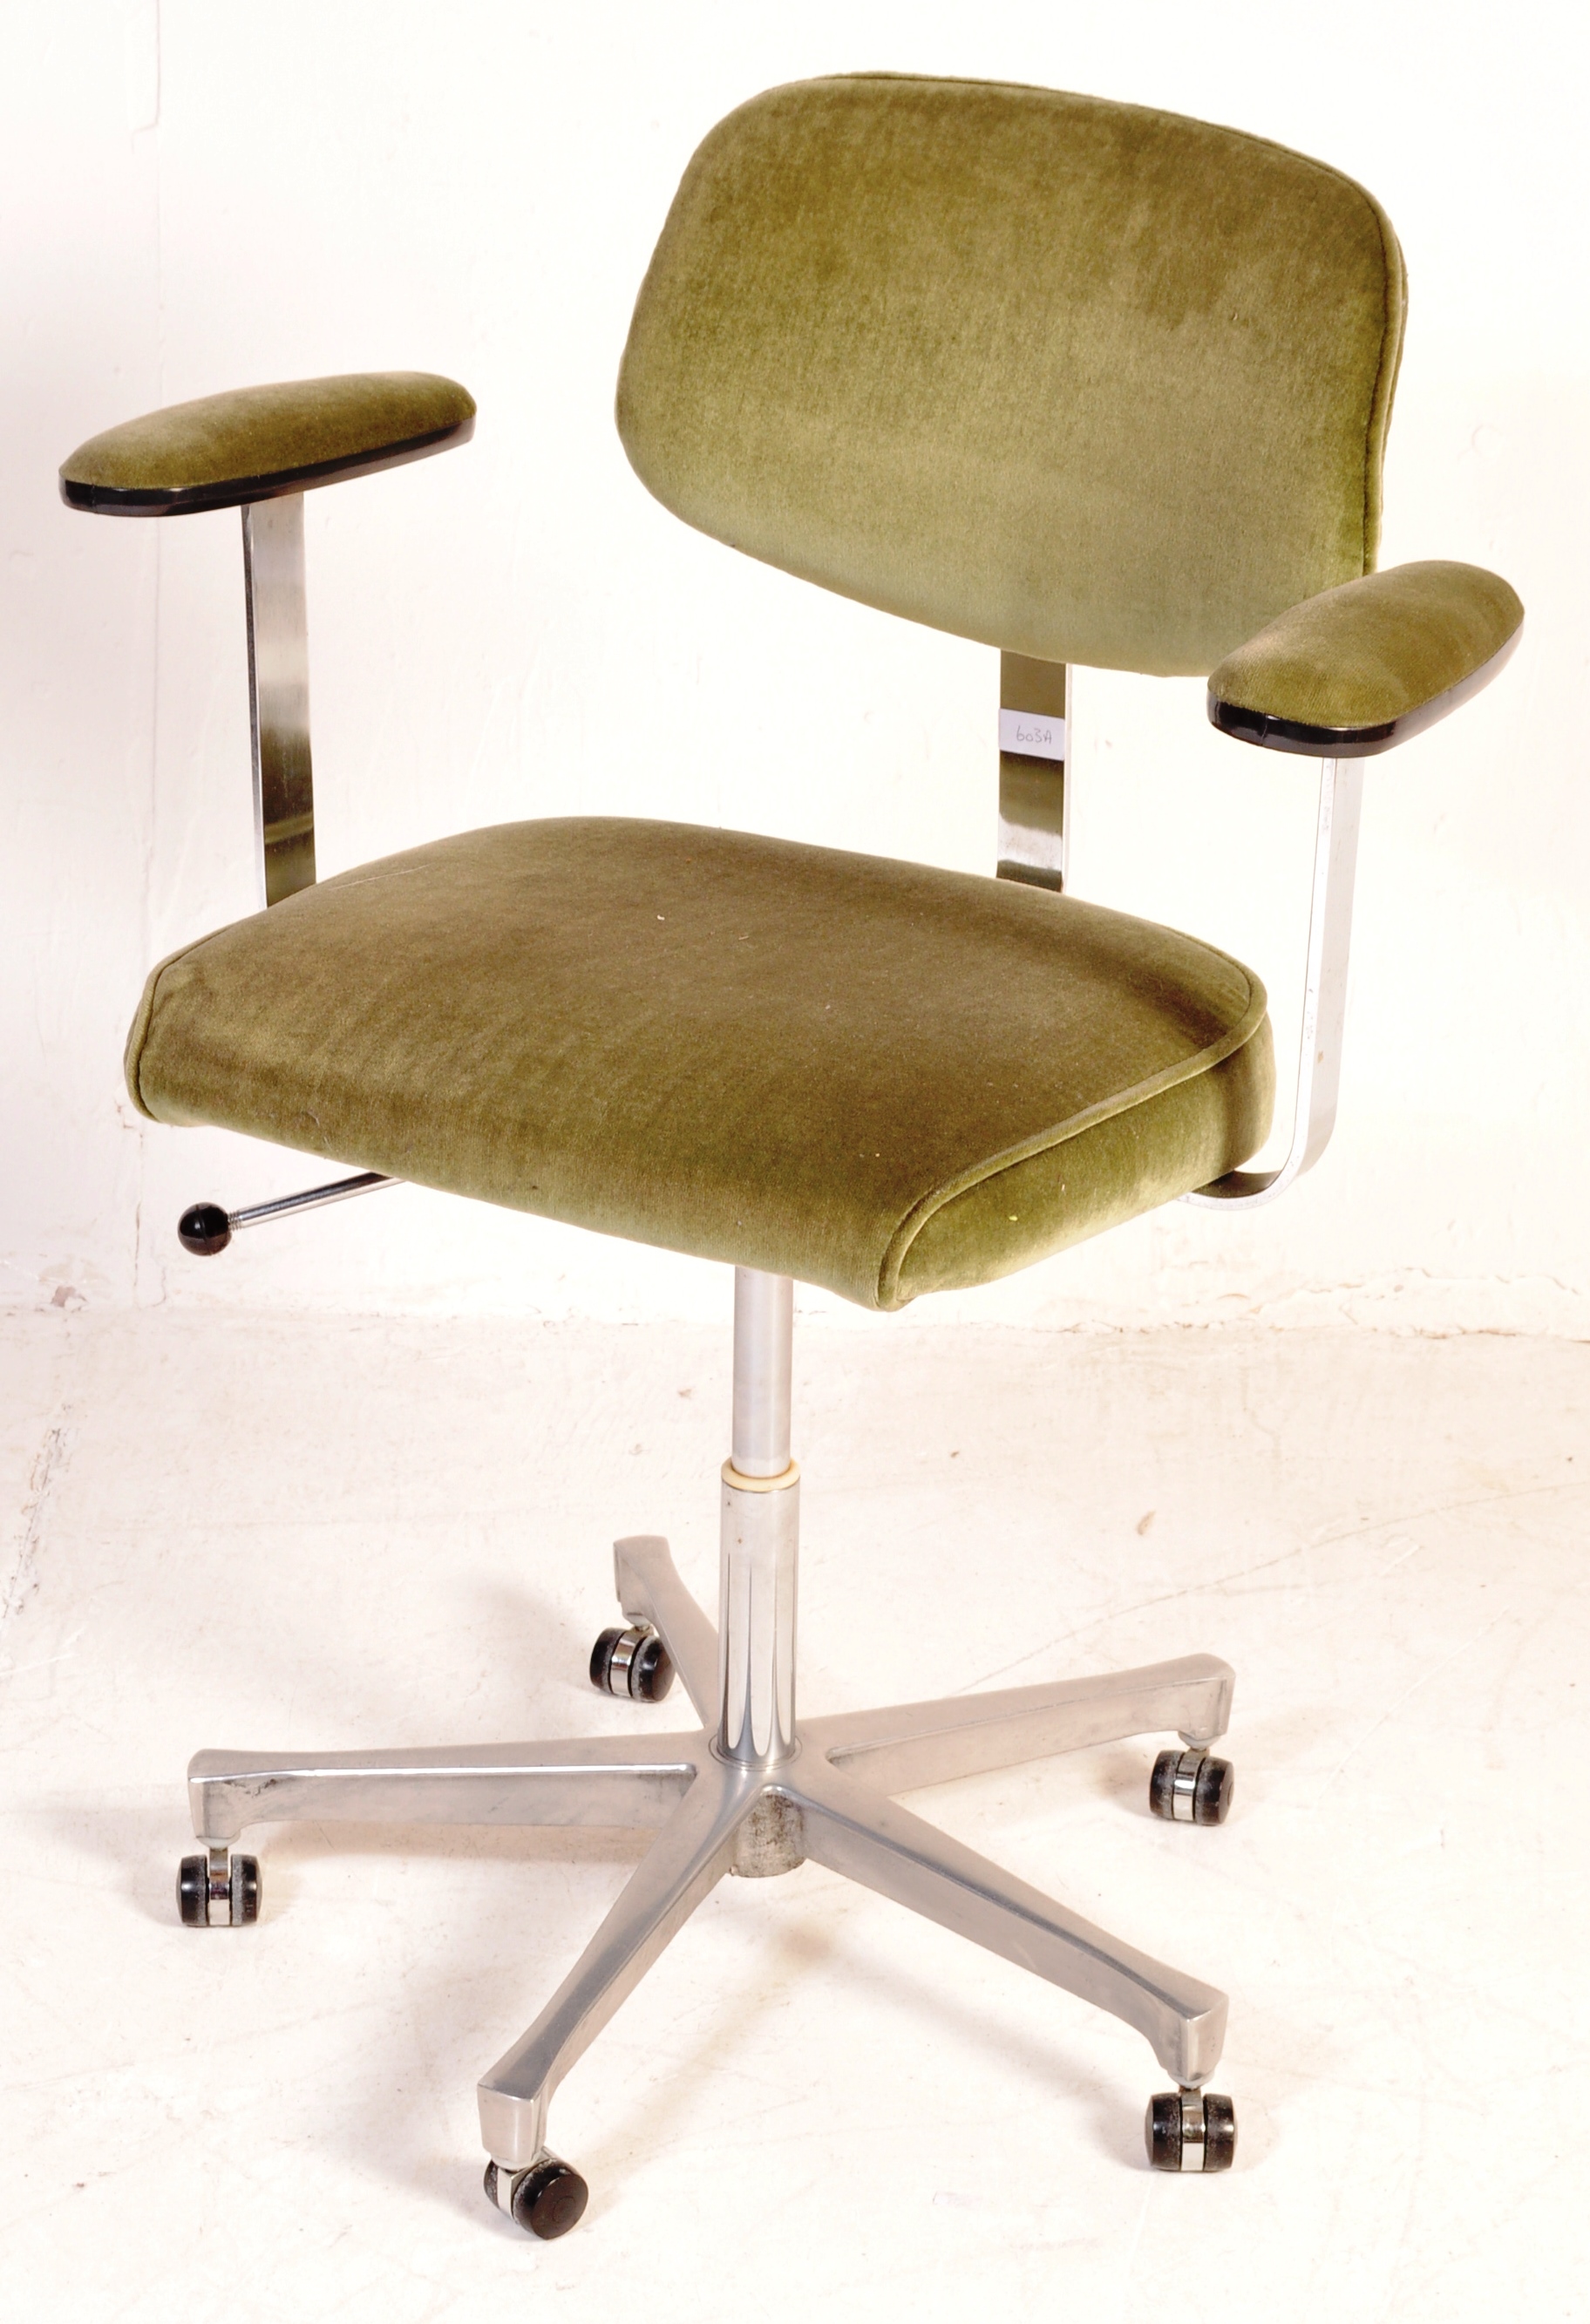 1980'S OLIVE GREEN OFFICE SWIVEL ARMCHAIR / DESK CHAIR - Image 2 of 8